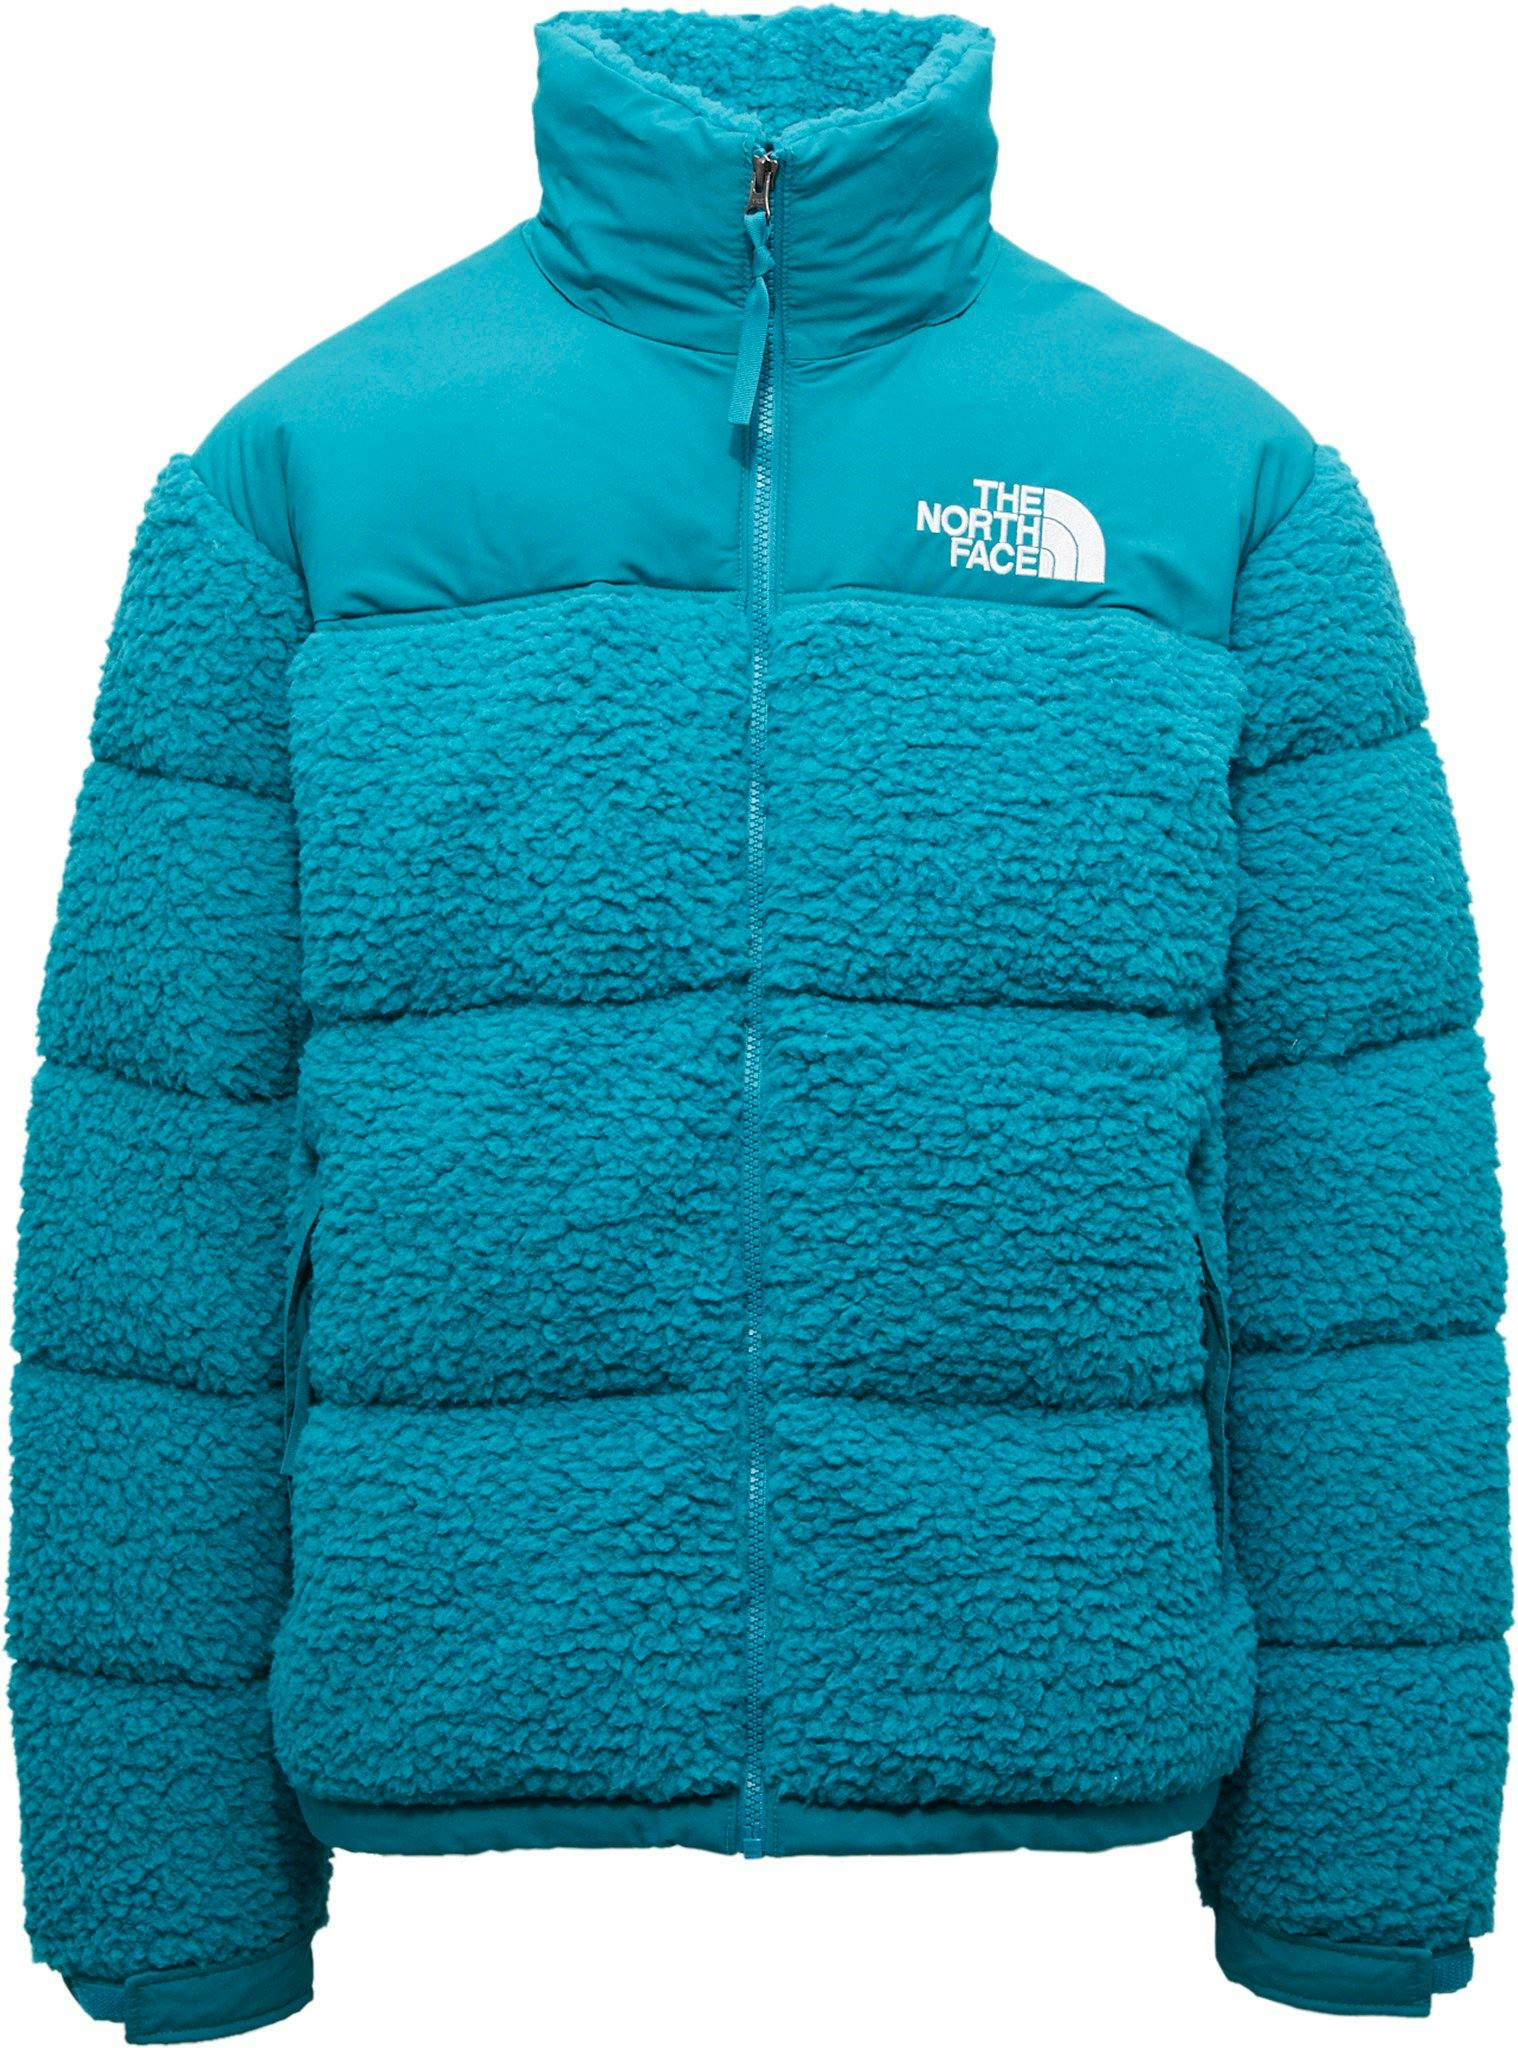 Product image for High PIle Nuptse Jacket - Men's